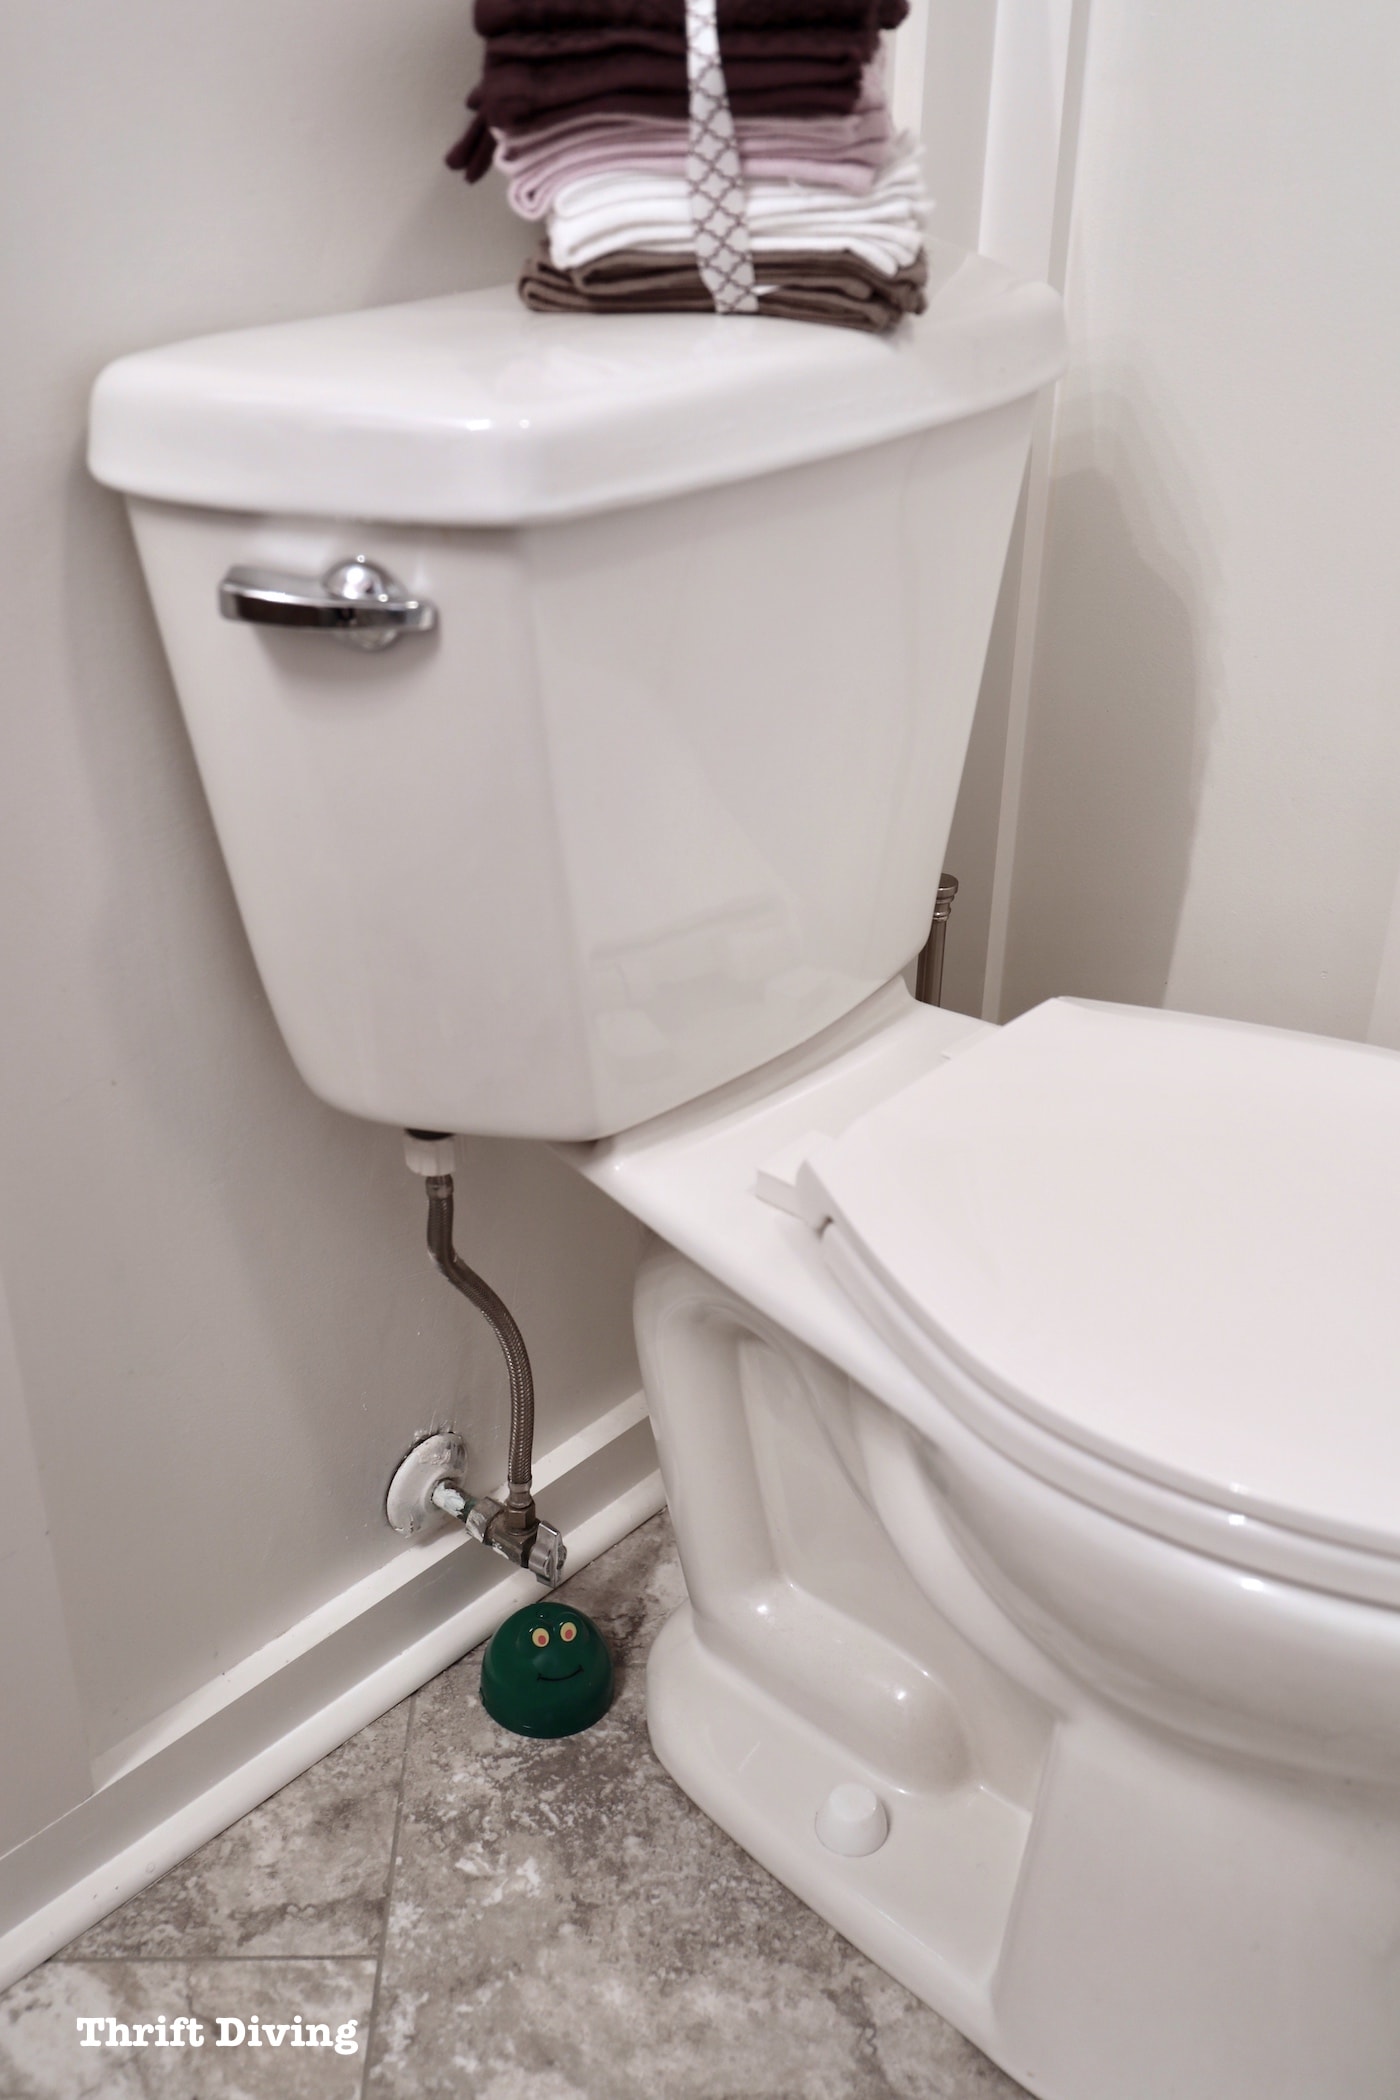 The Leak Frog leak detector can detect water around toilets, washing machines, under sinks, and other places where leaks can happen. - Thrift Diving